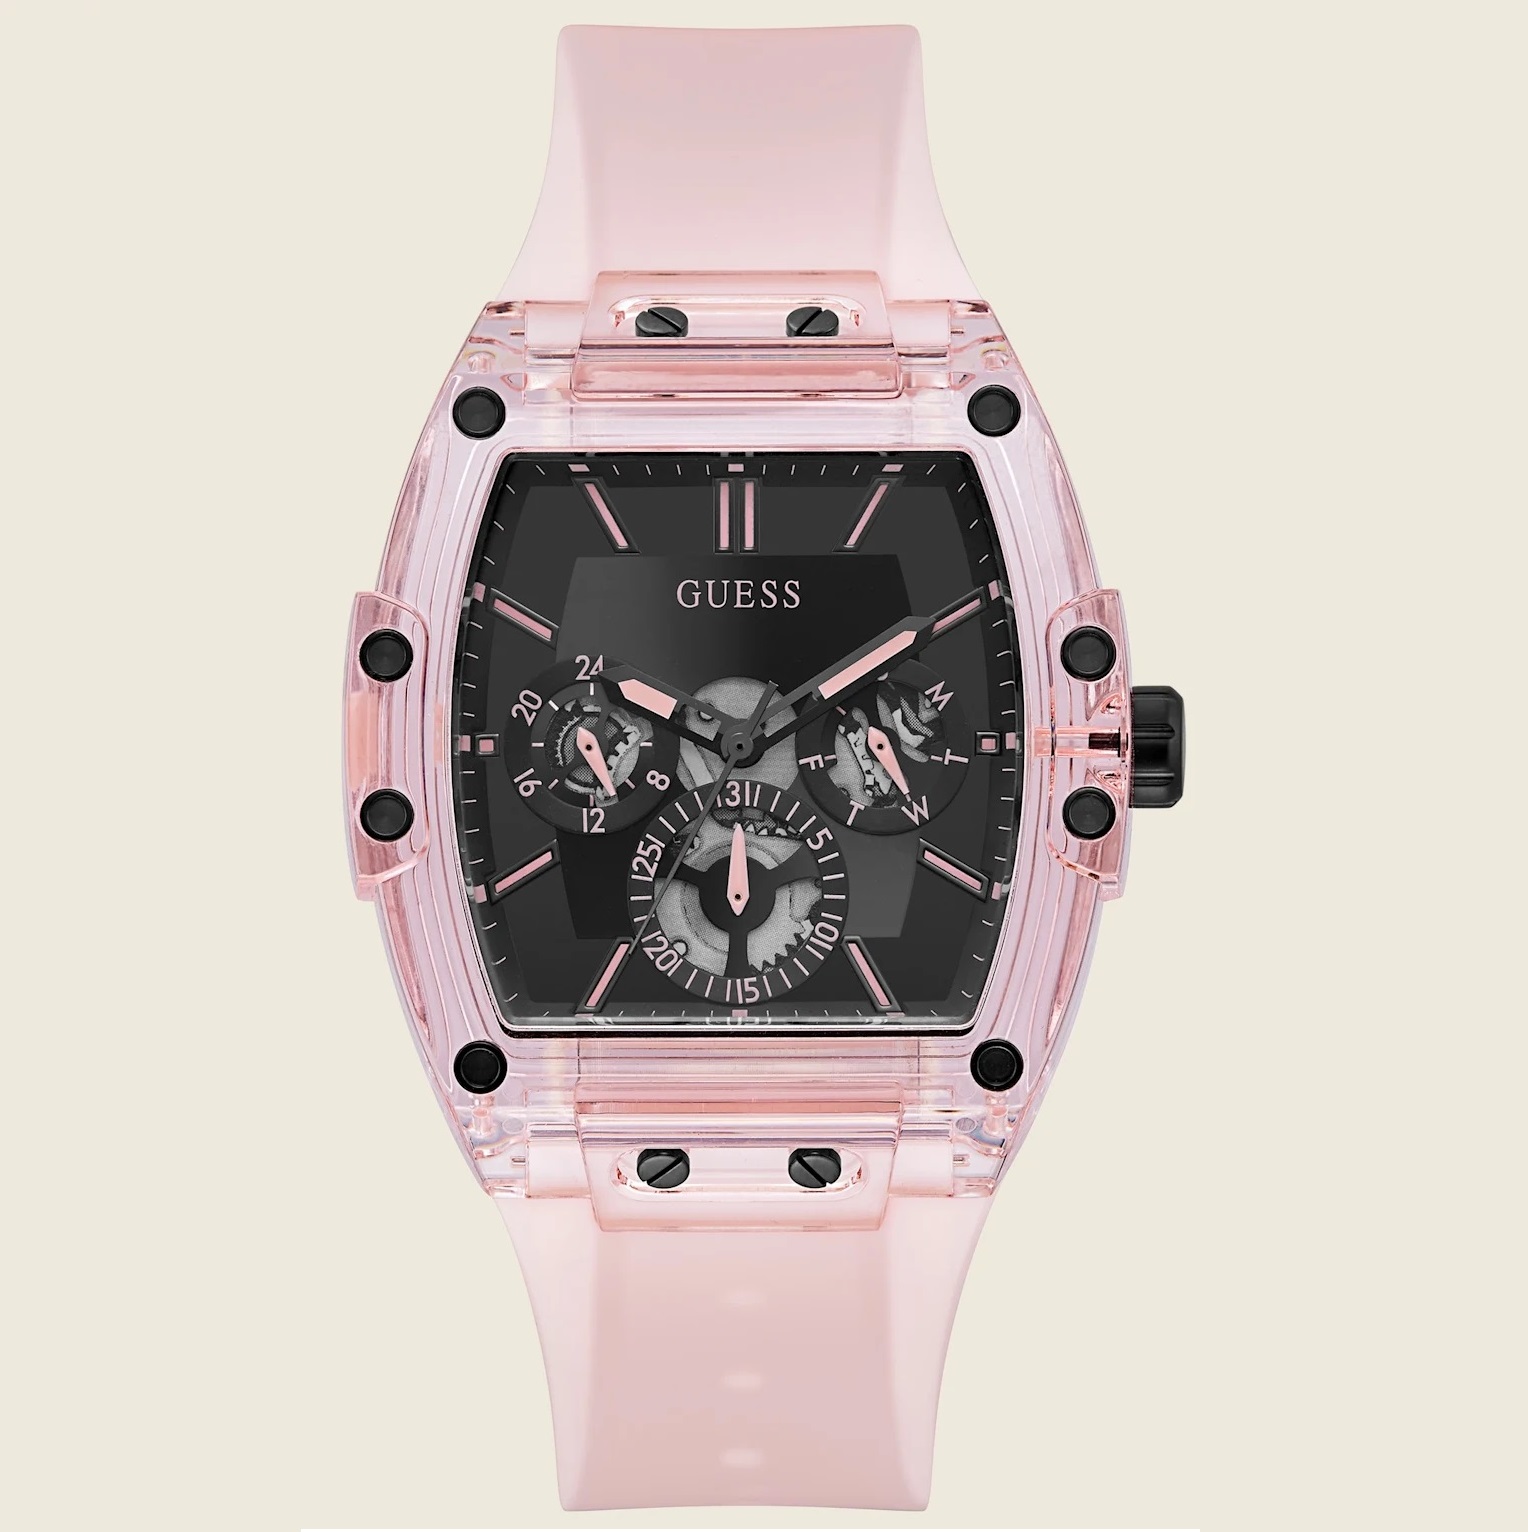 ĐỒNG HỒ NỮ GUESS PINK MULTIFUNCTION WATCH 3